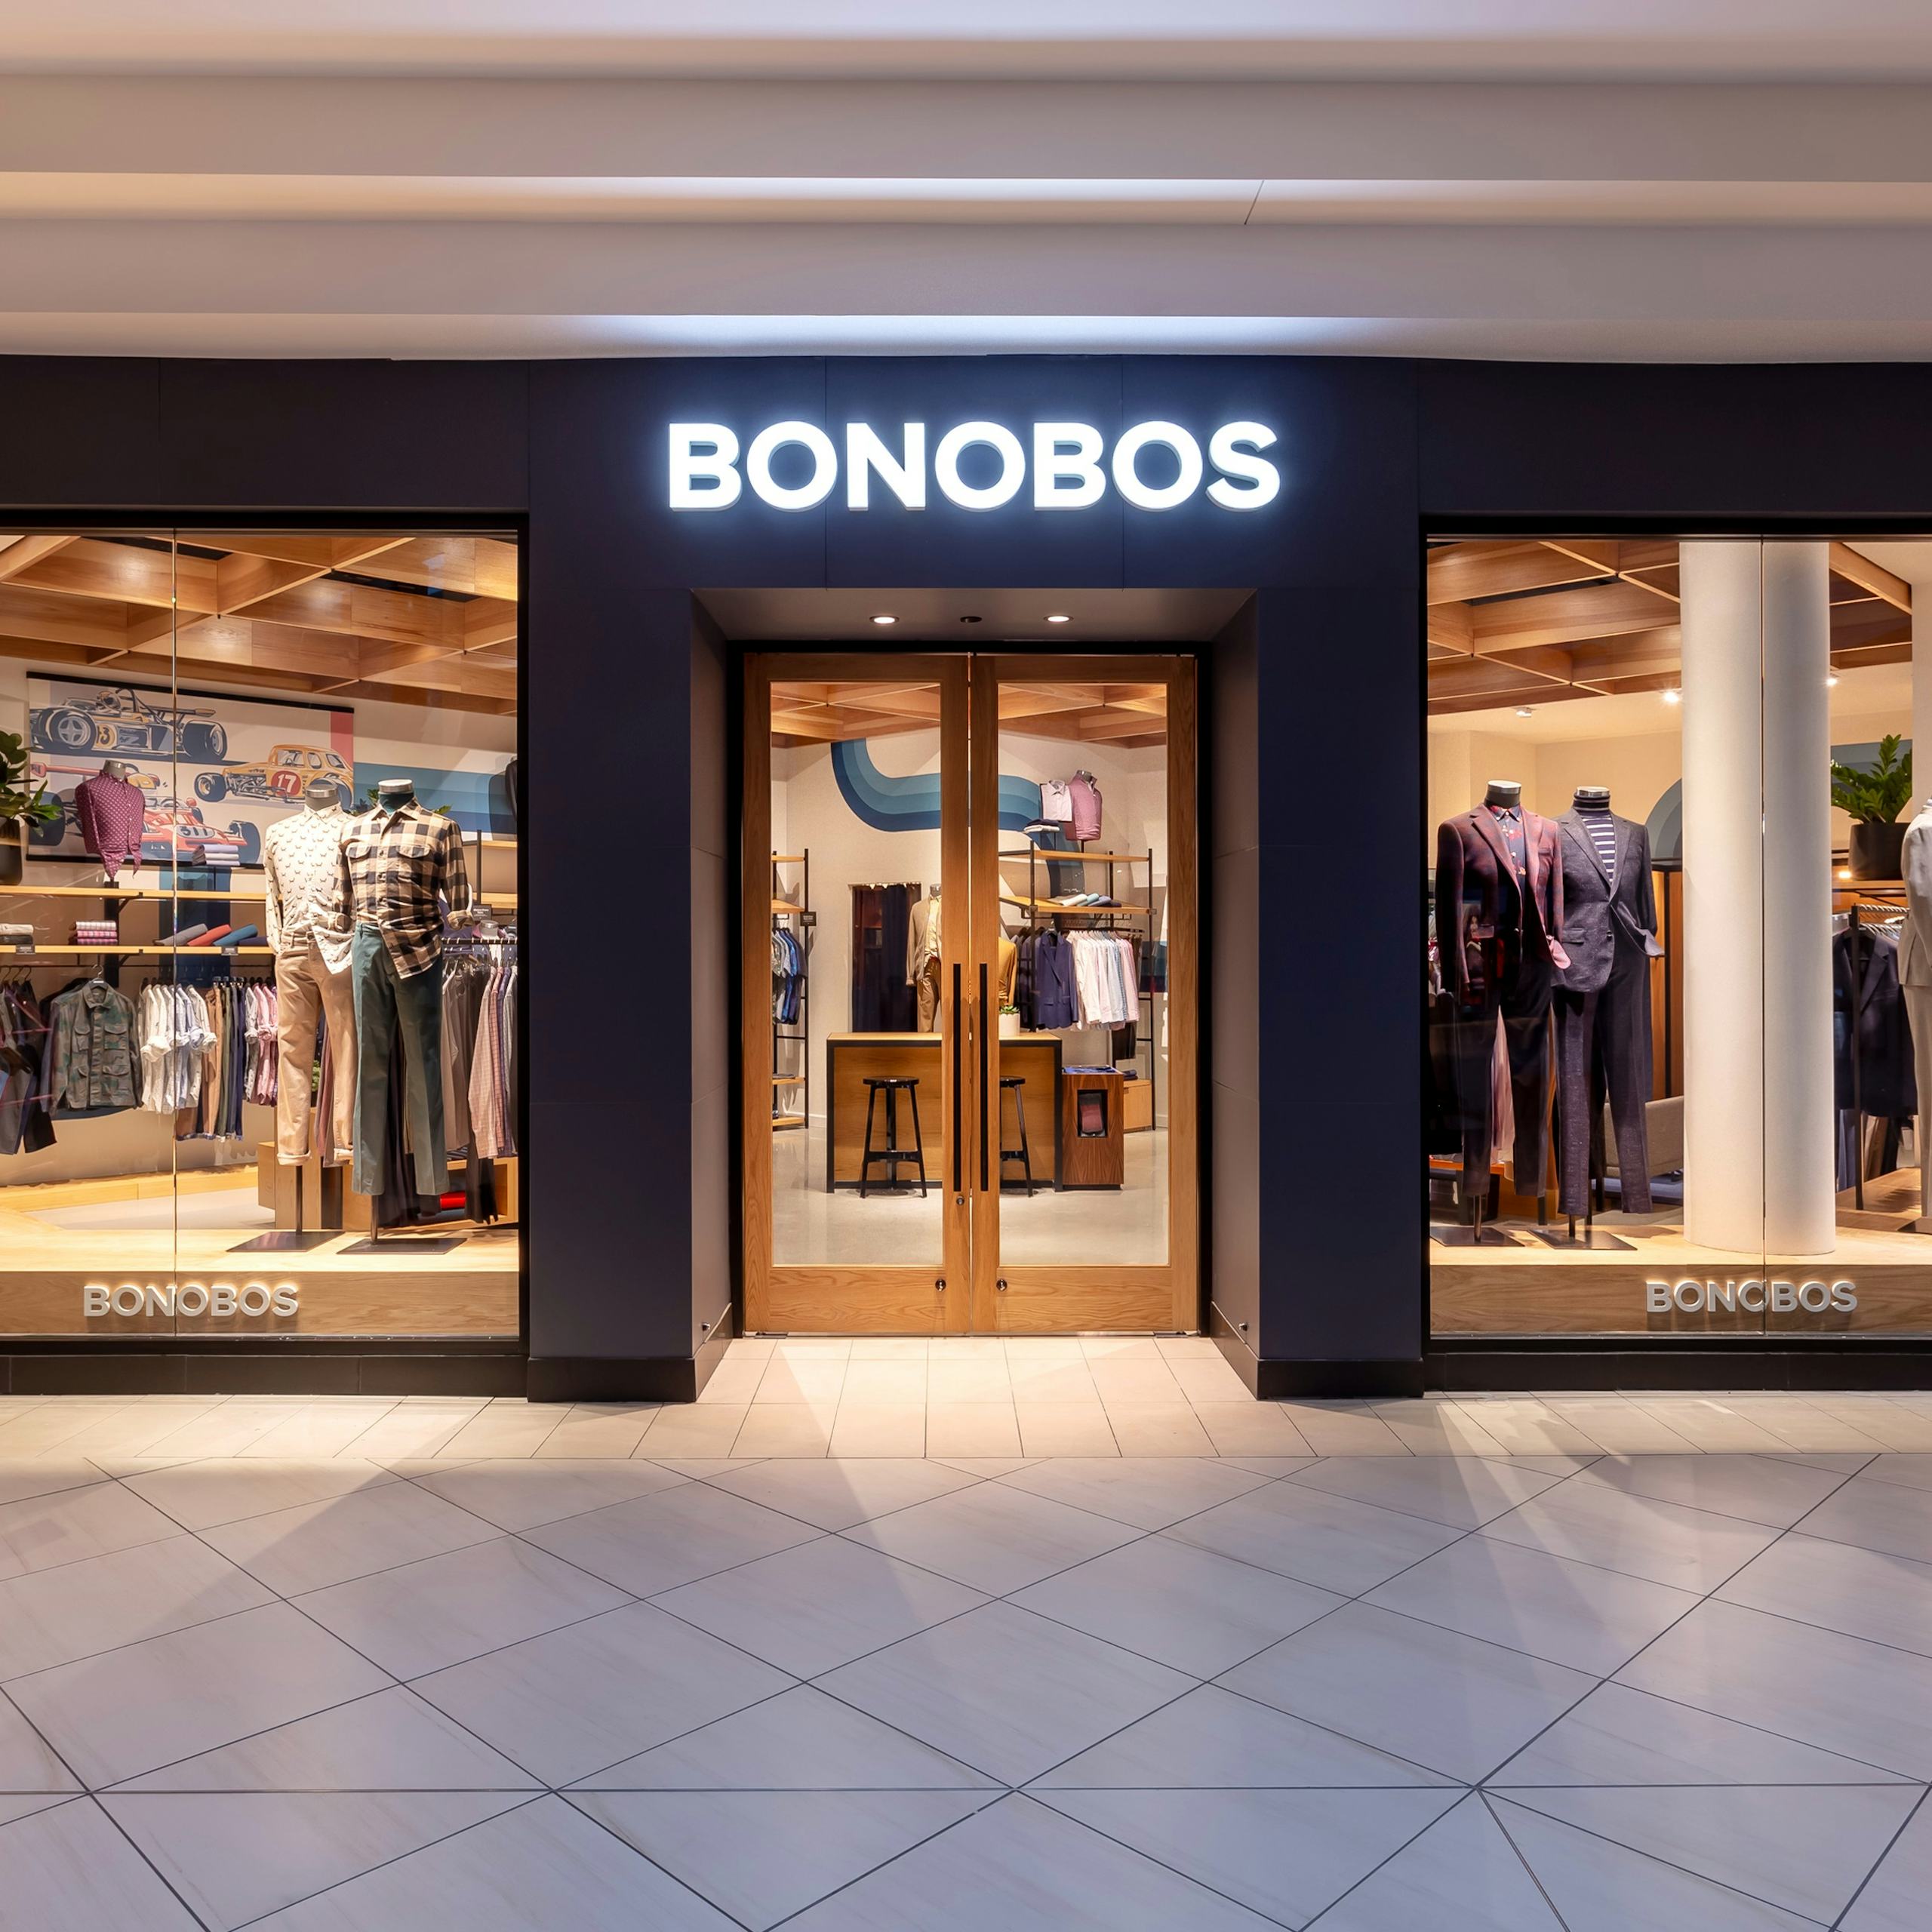 Image of Bonobos Store in The Fashion Mall At Keystone Crossing, Indianapolis. There are 2 mannequins with suits on the right side, and 2 mannequins with casual shirts and chinos and on the left side.  